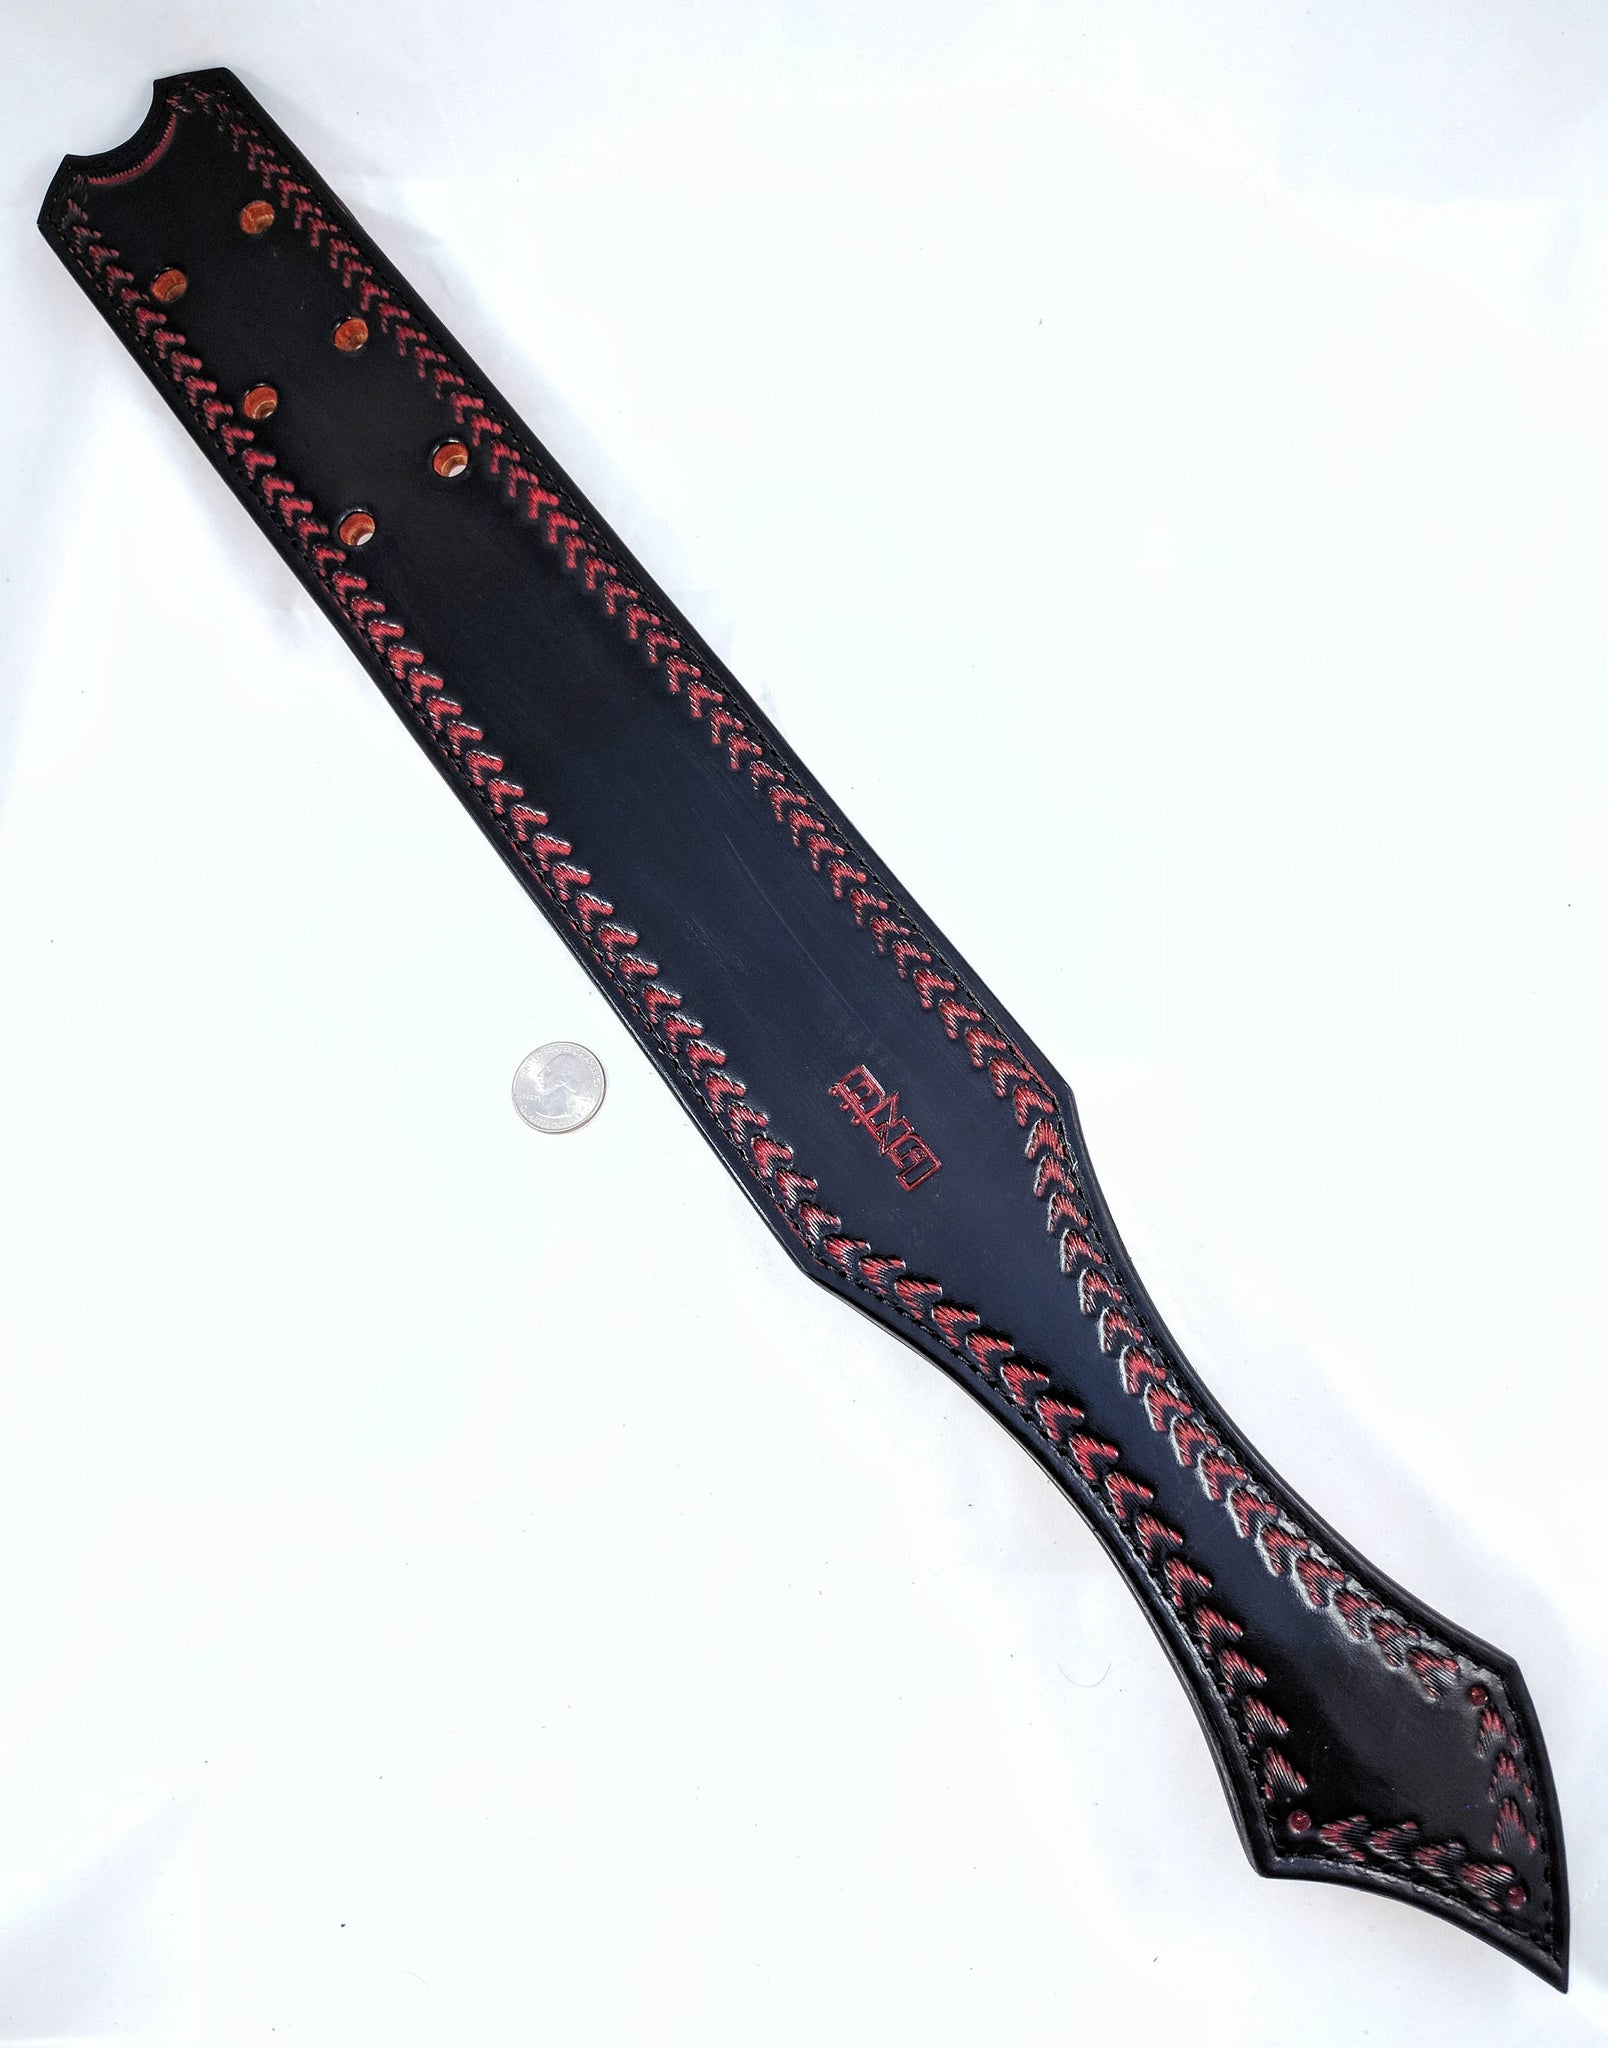 Prison Strap Heavy Leather Bdsm Spanking Paddle "Black and Red" Ready-to-Ship